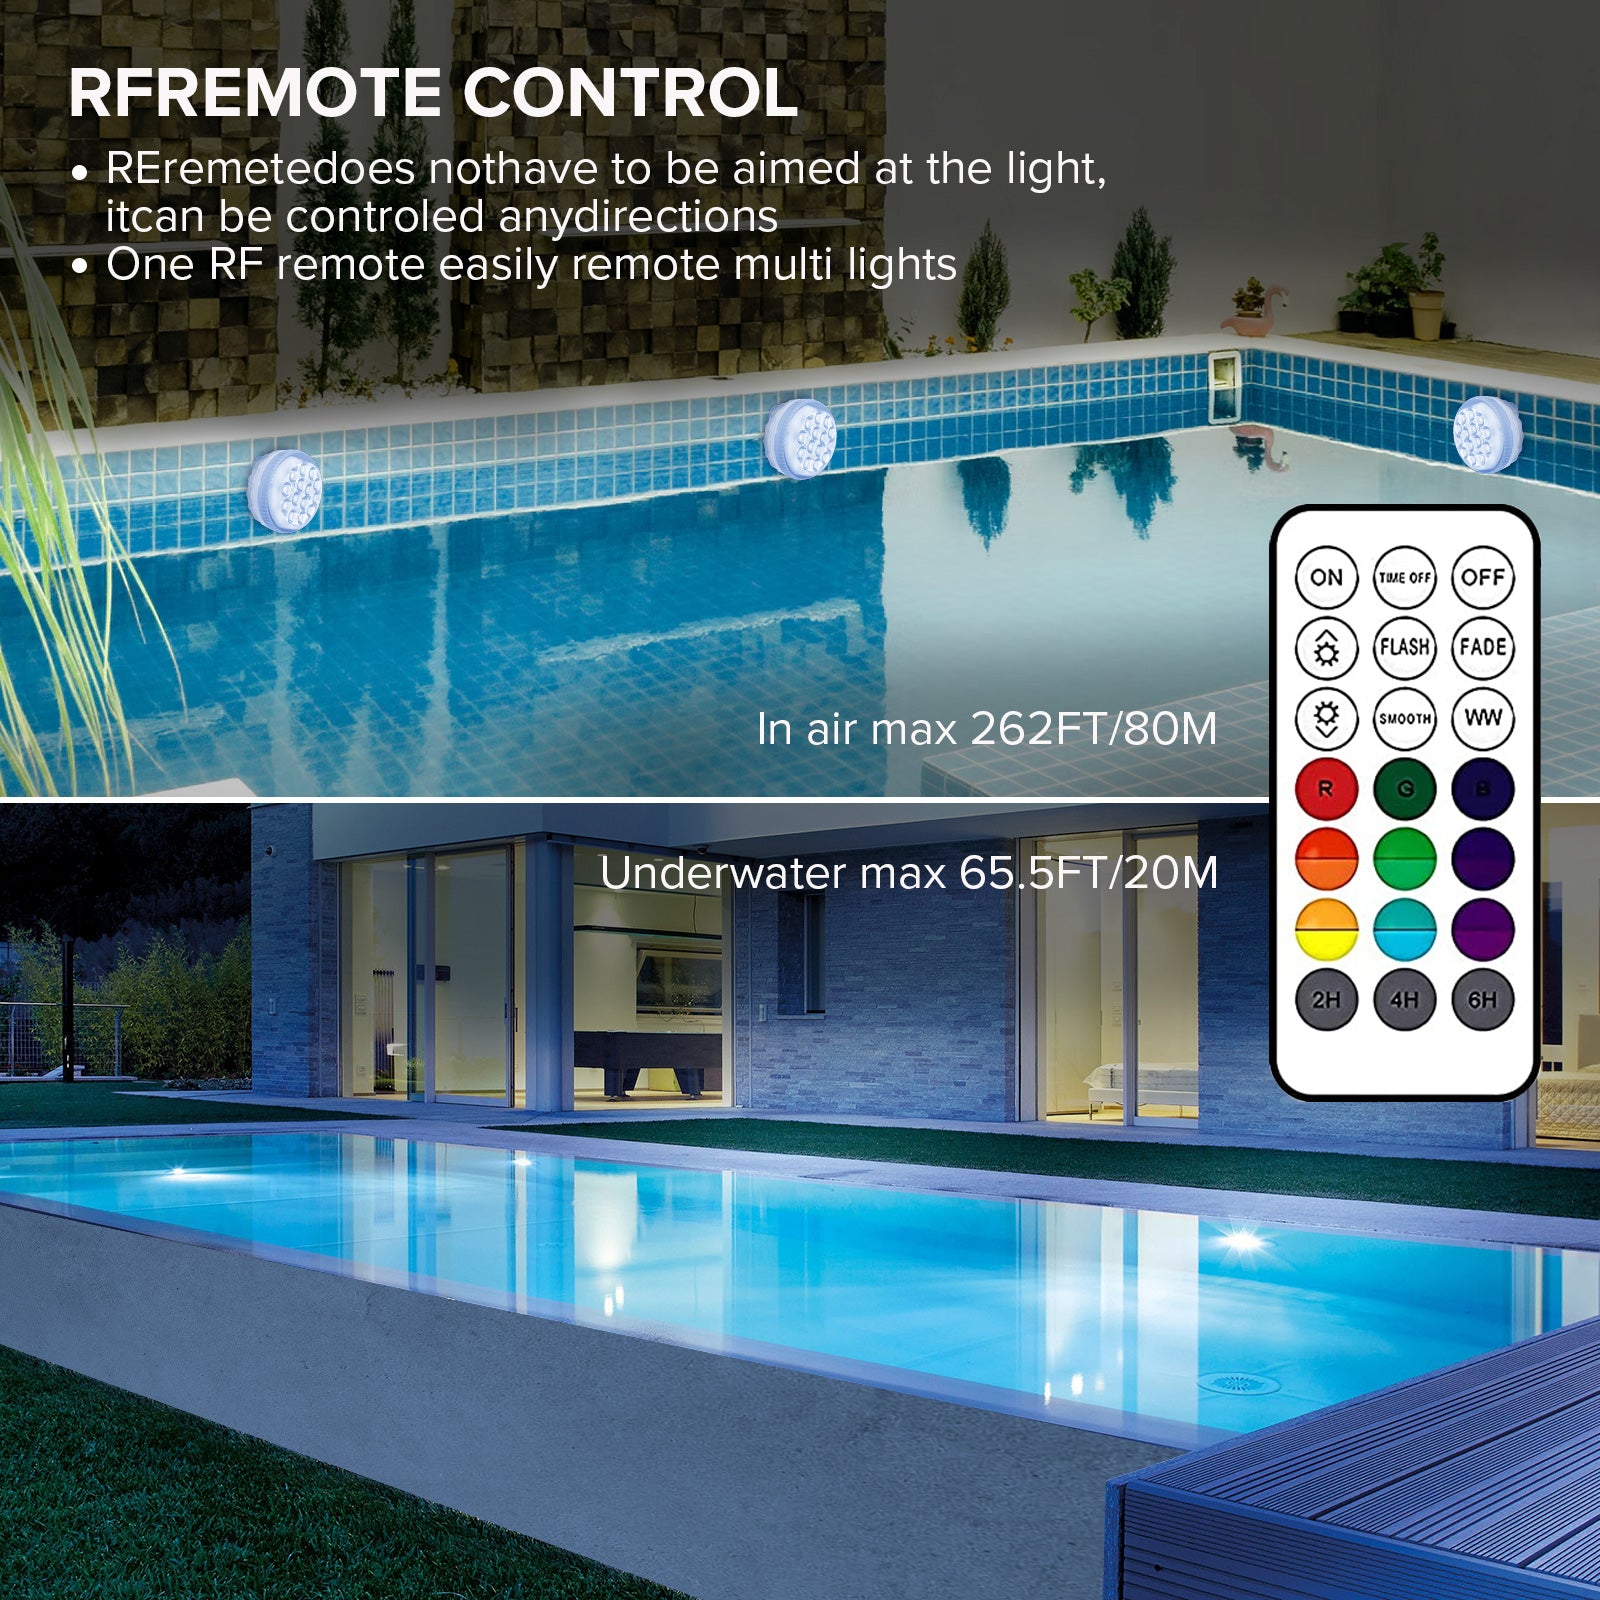 RGB LED Submersible Pool Light (US ONLY) is controled by RF remote.